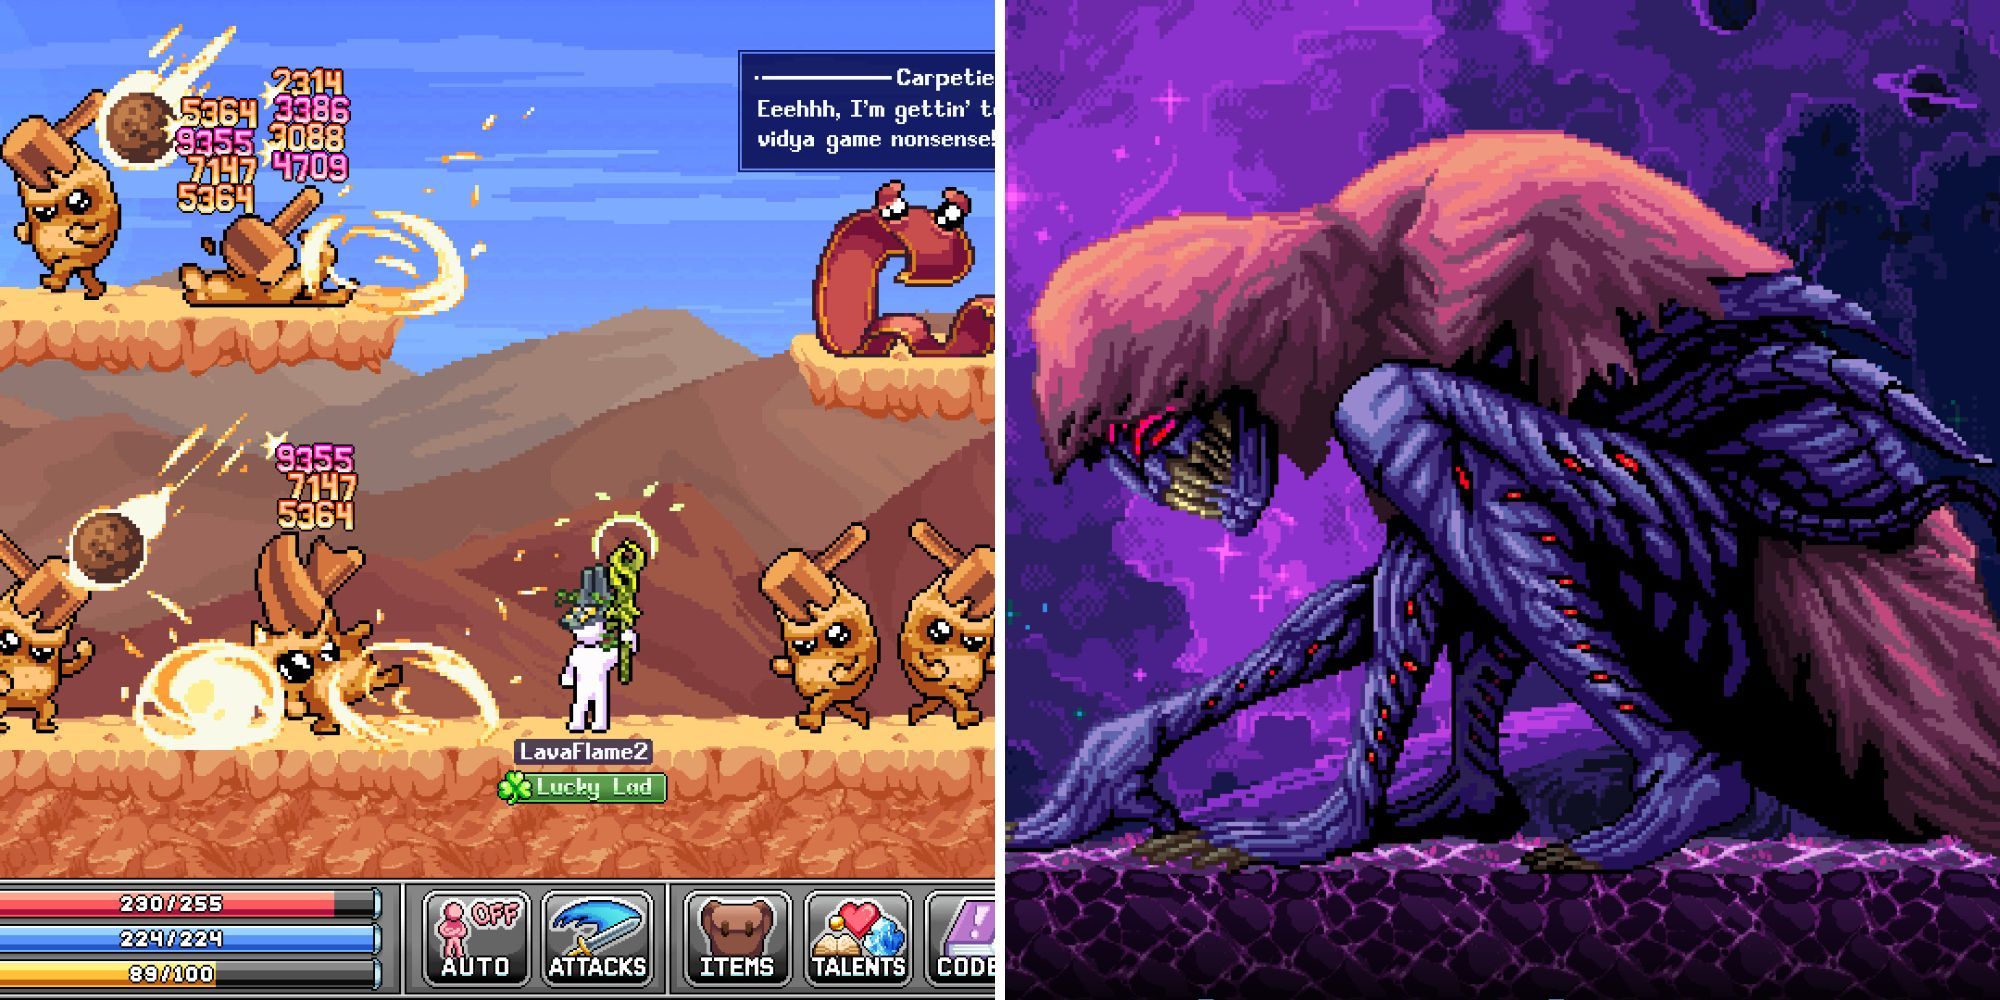 A split image of a large purple-skinned creature with sharp teeth, and a pixel art character fighting what appears to be potatoes with arms, legs, and faces.